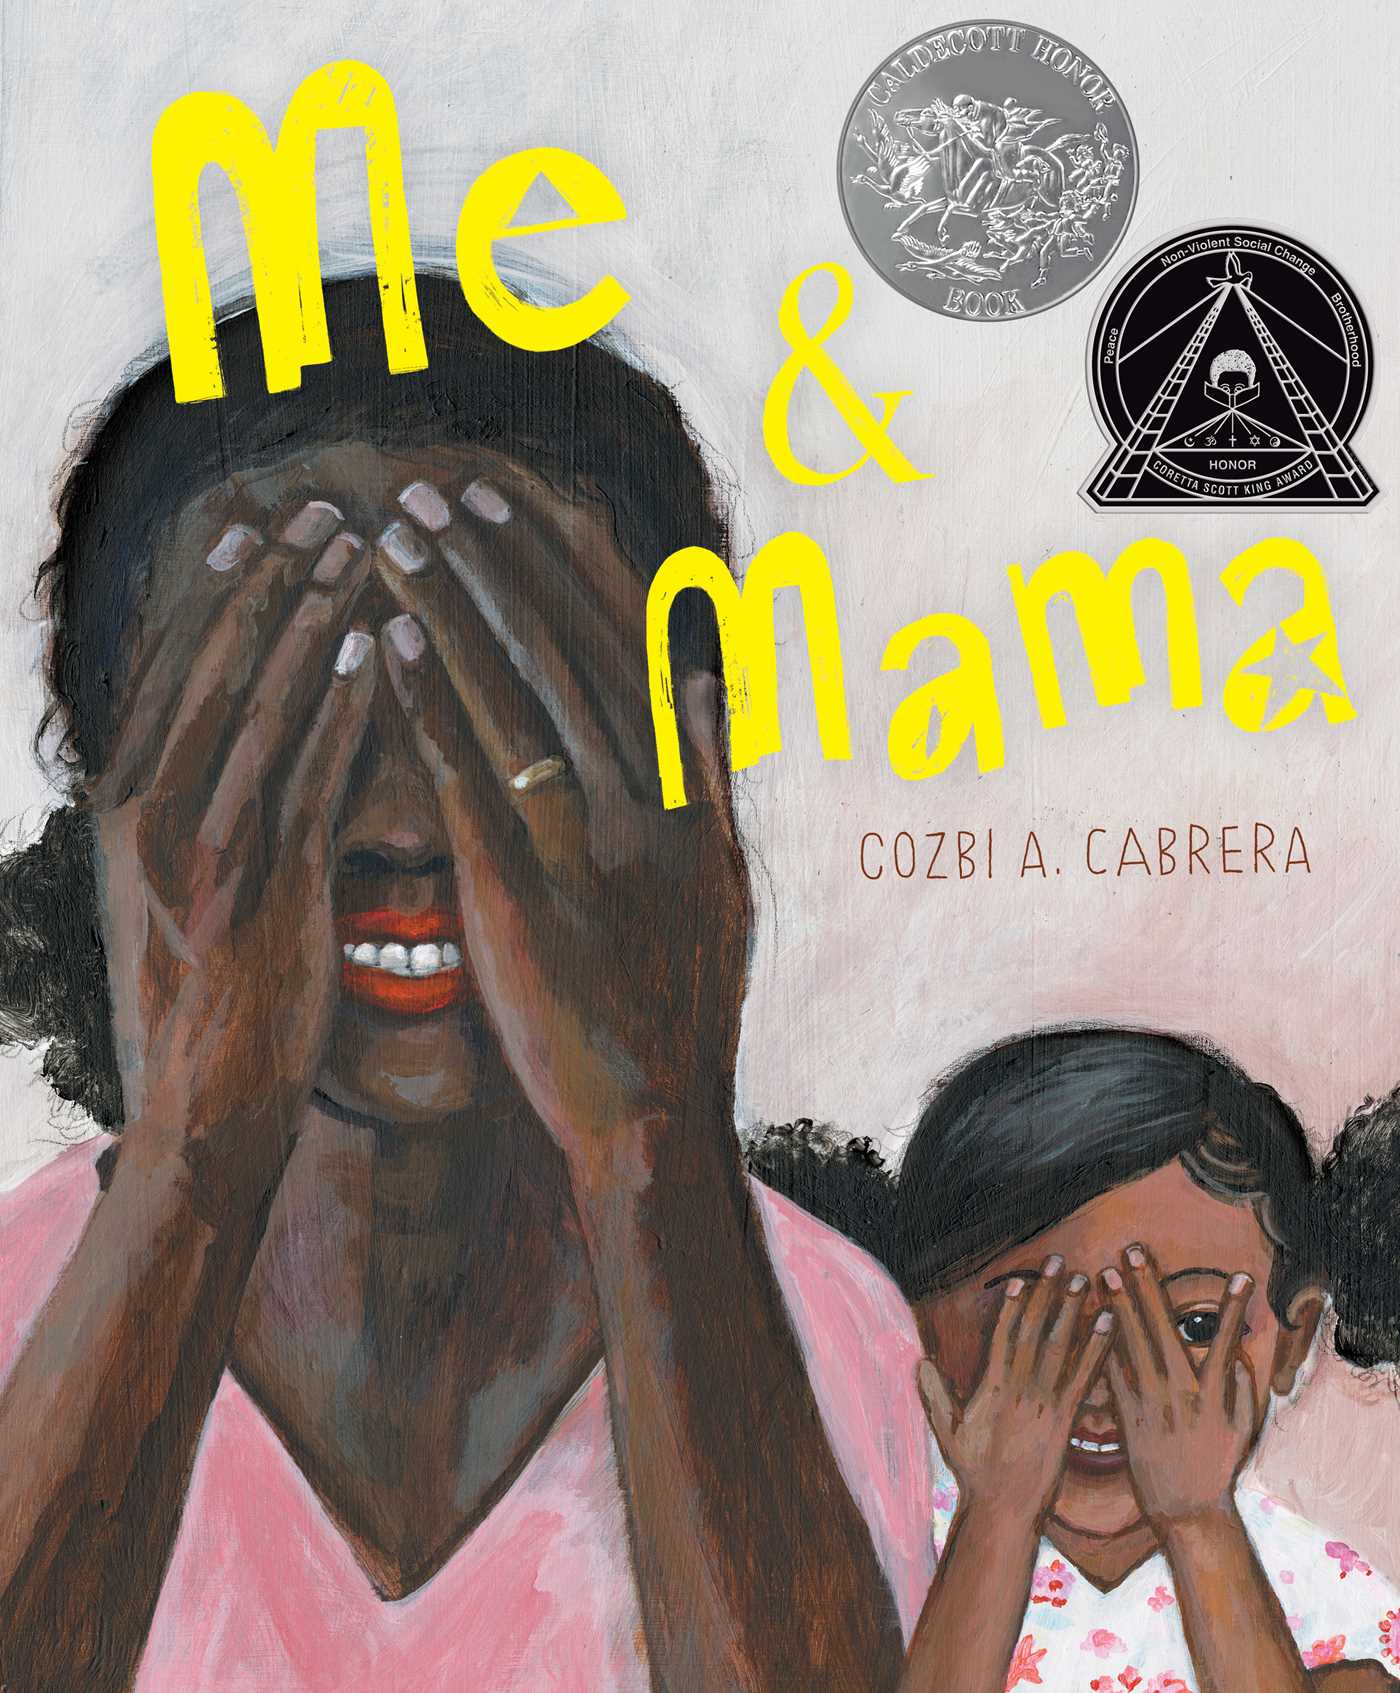 A Black mother and her daughter playfully cover their eyes, while smiling. The title of the book is written at the top in large, yellow letters, and the Caldecott Honor and Coretta Scott King Medal are present in the upper-righthand corner of the picture.